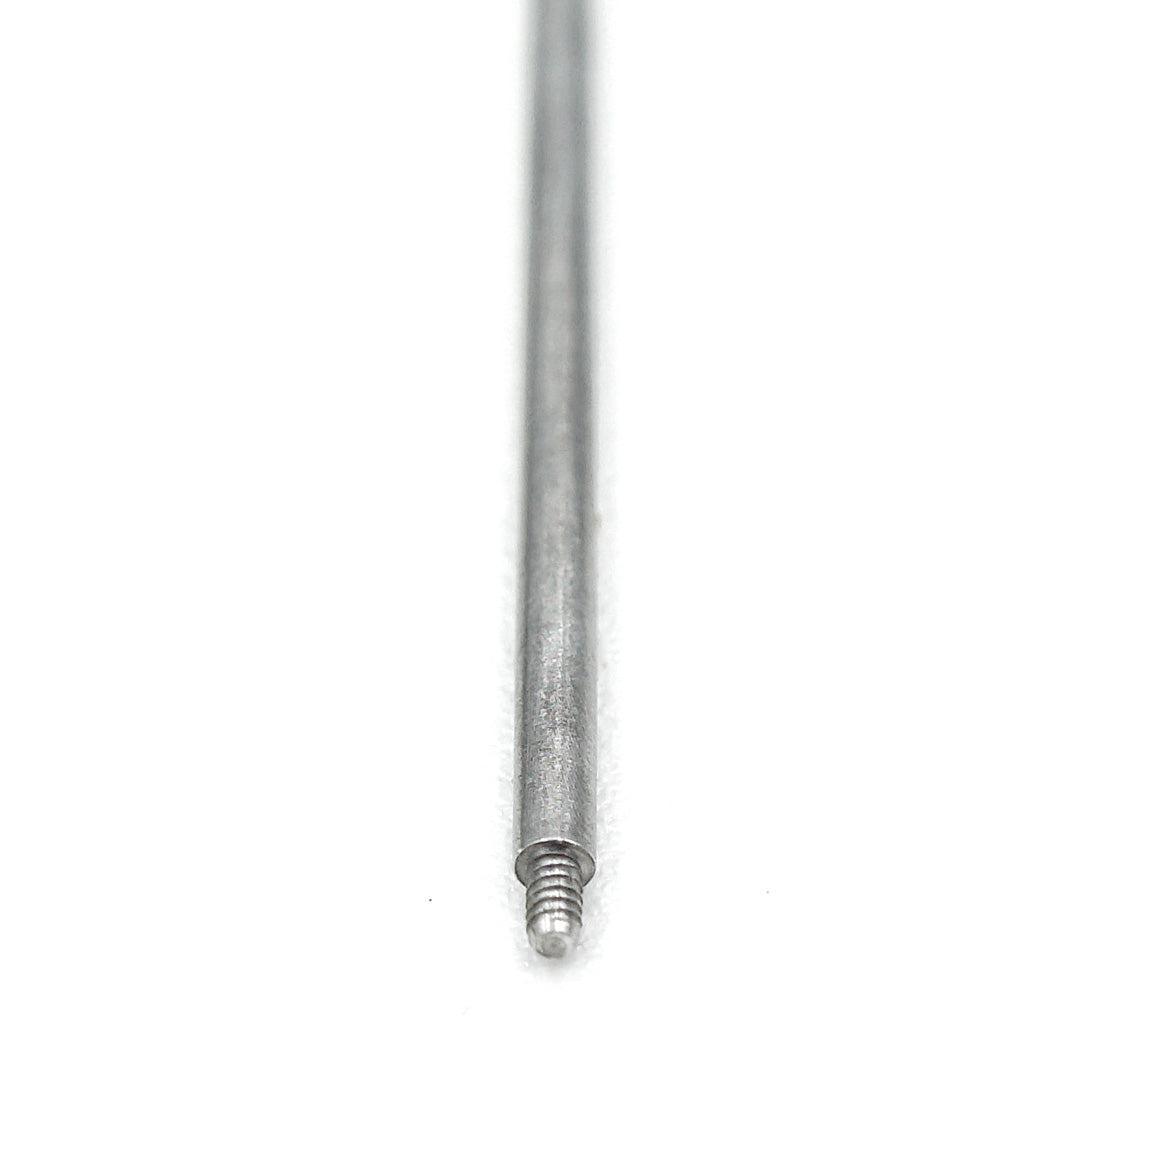 Stiletto Piercing Tapers - 18G